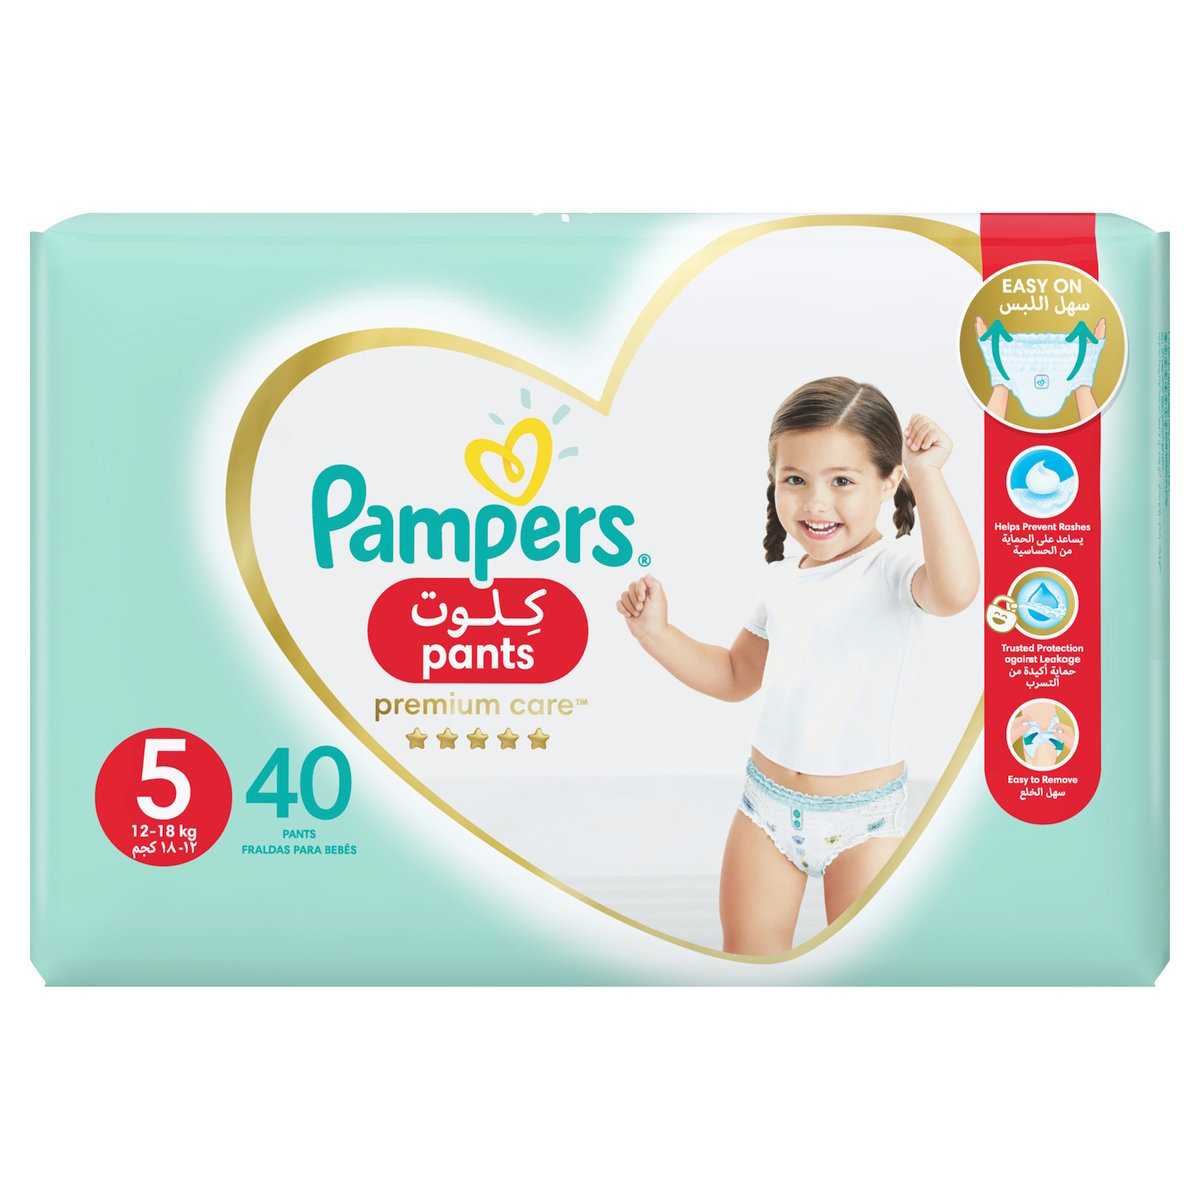 Pampers Premium Care Pants Diapers Size 5, 12-18kg with Stretchy Sides for Better Fit 40pcs